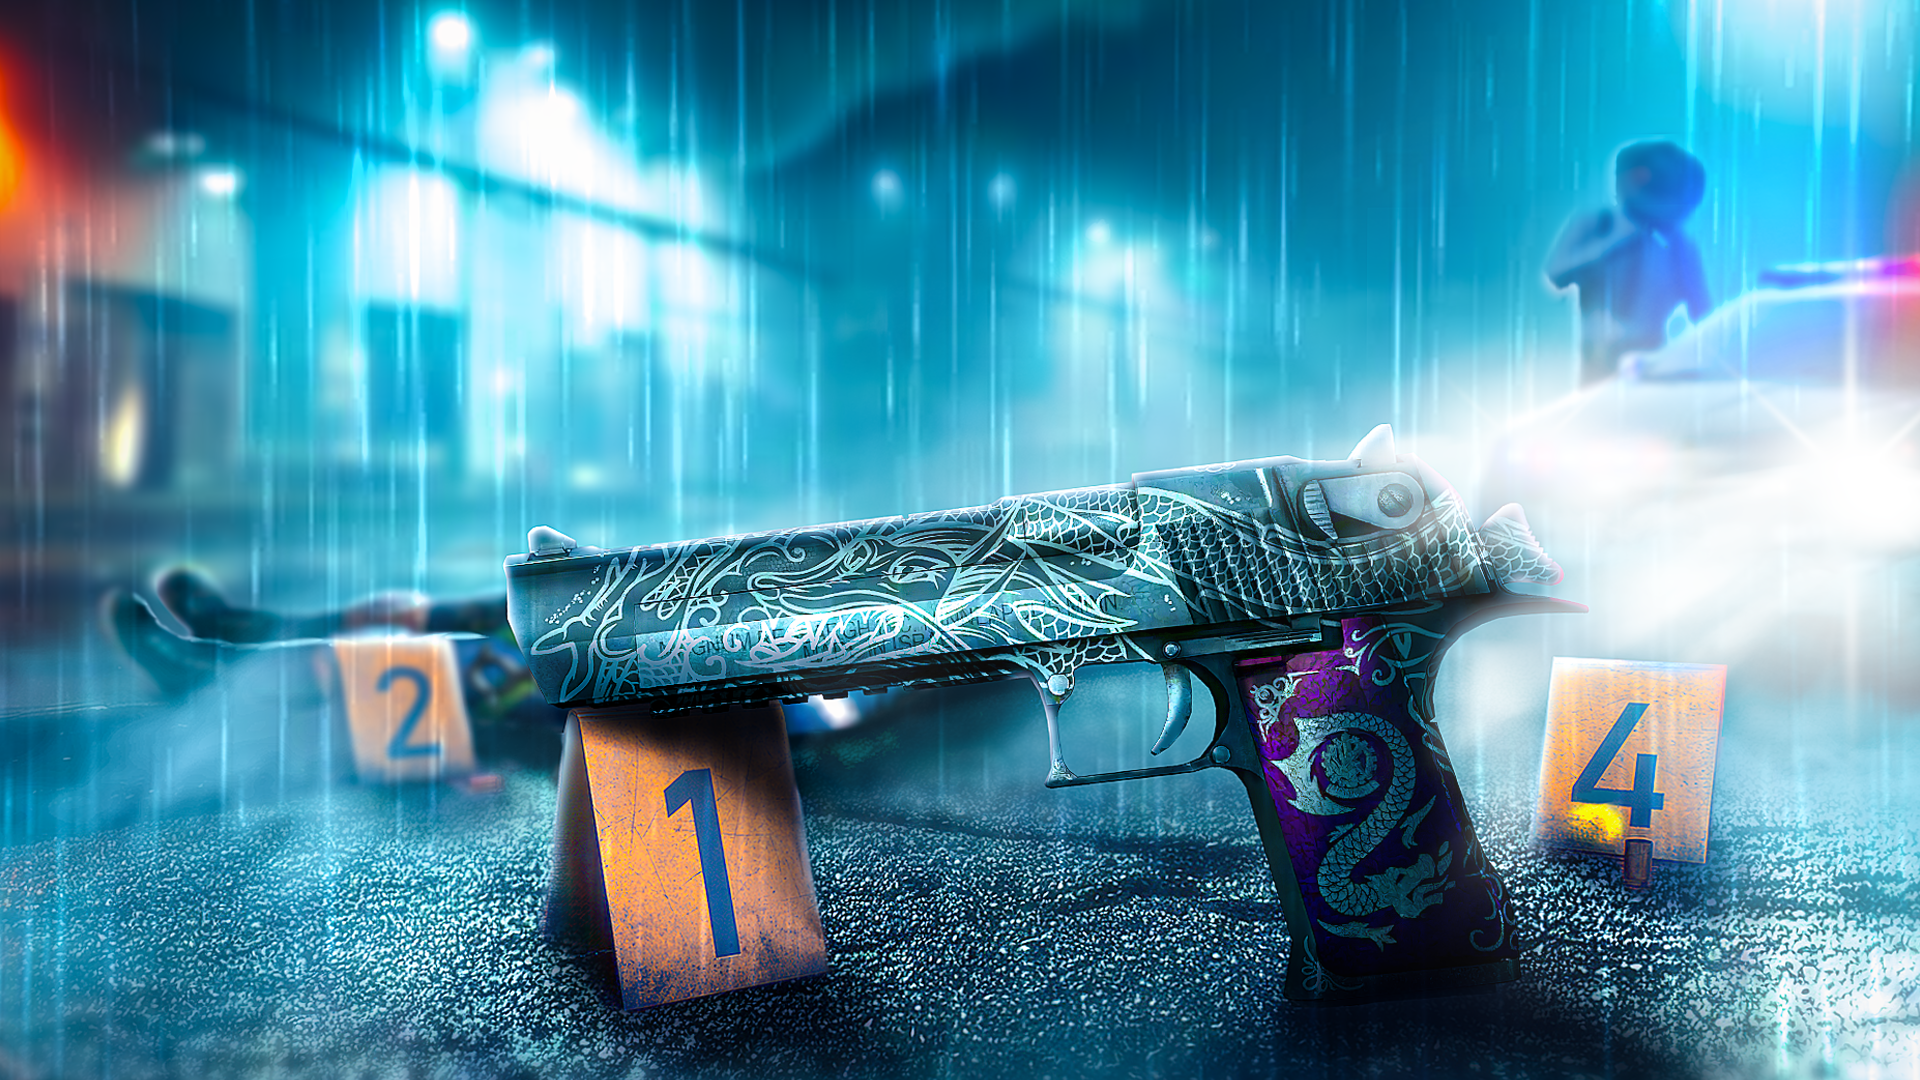 The Best Deagle Skins in CS:GO